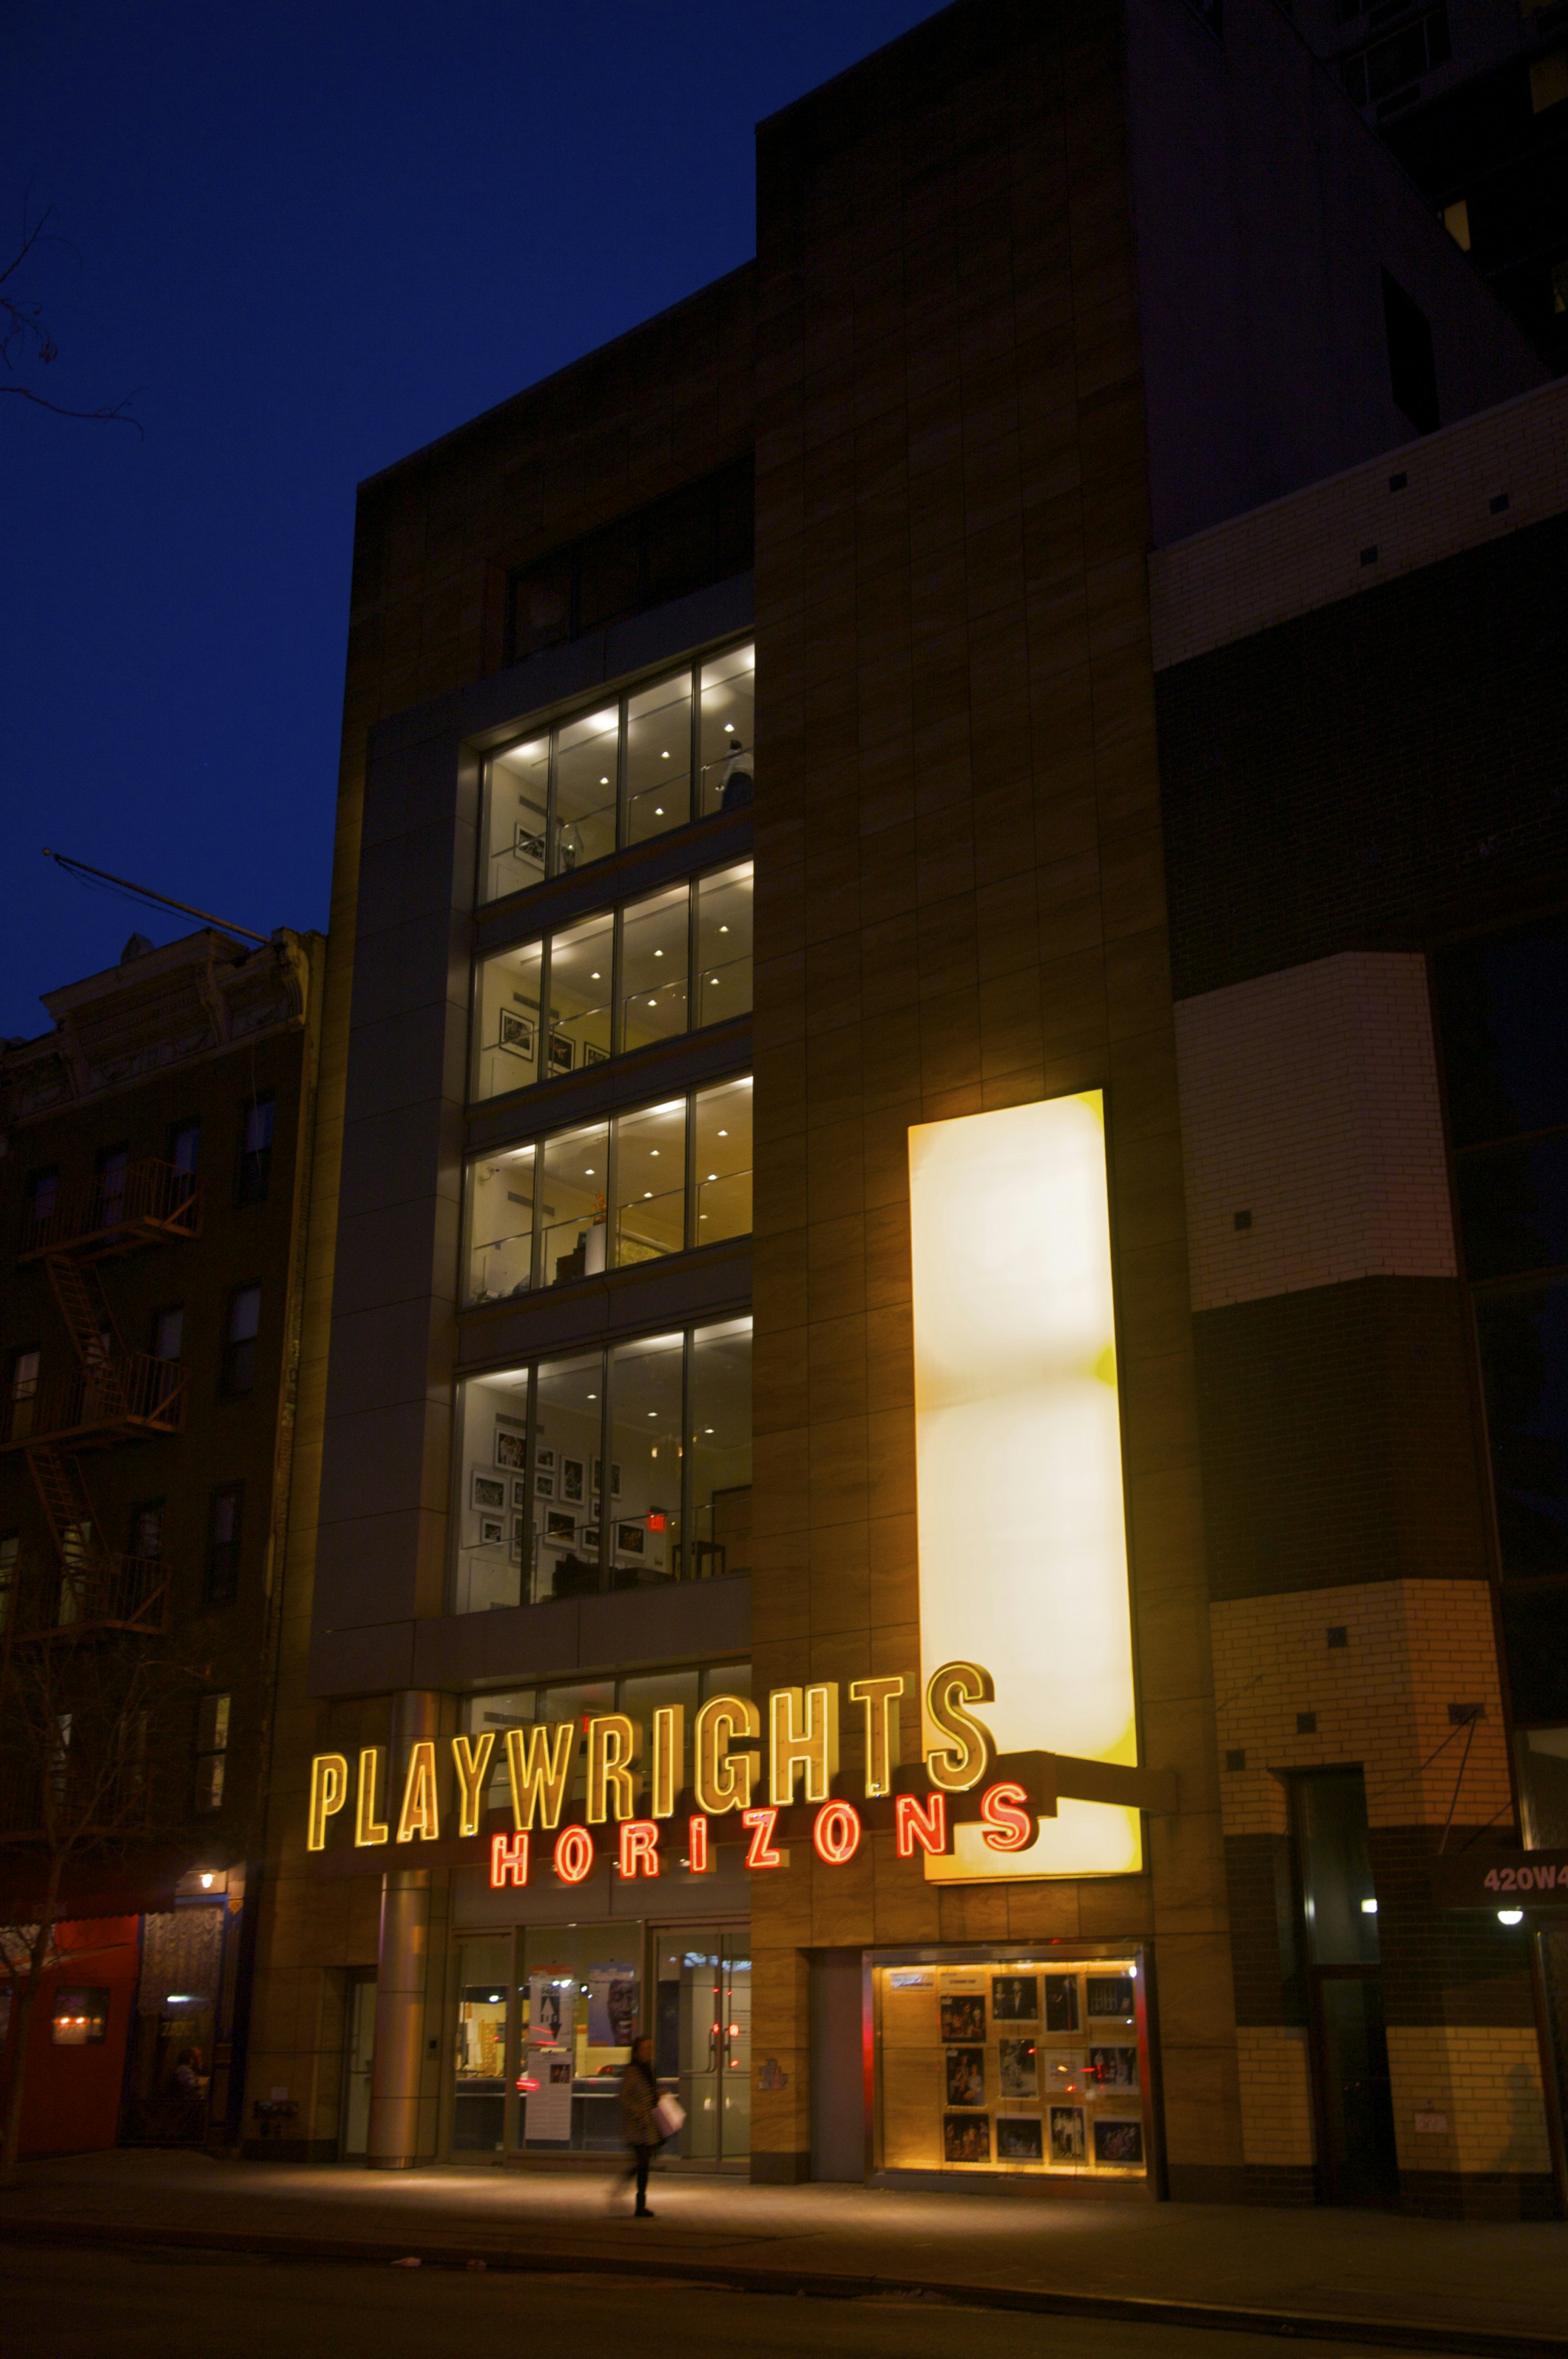 Playwrights Horizons onW 42nd Street, Midtown West, New York, NY, USA